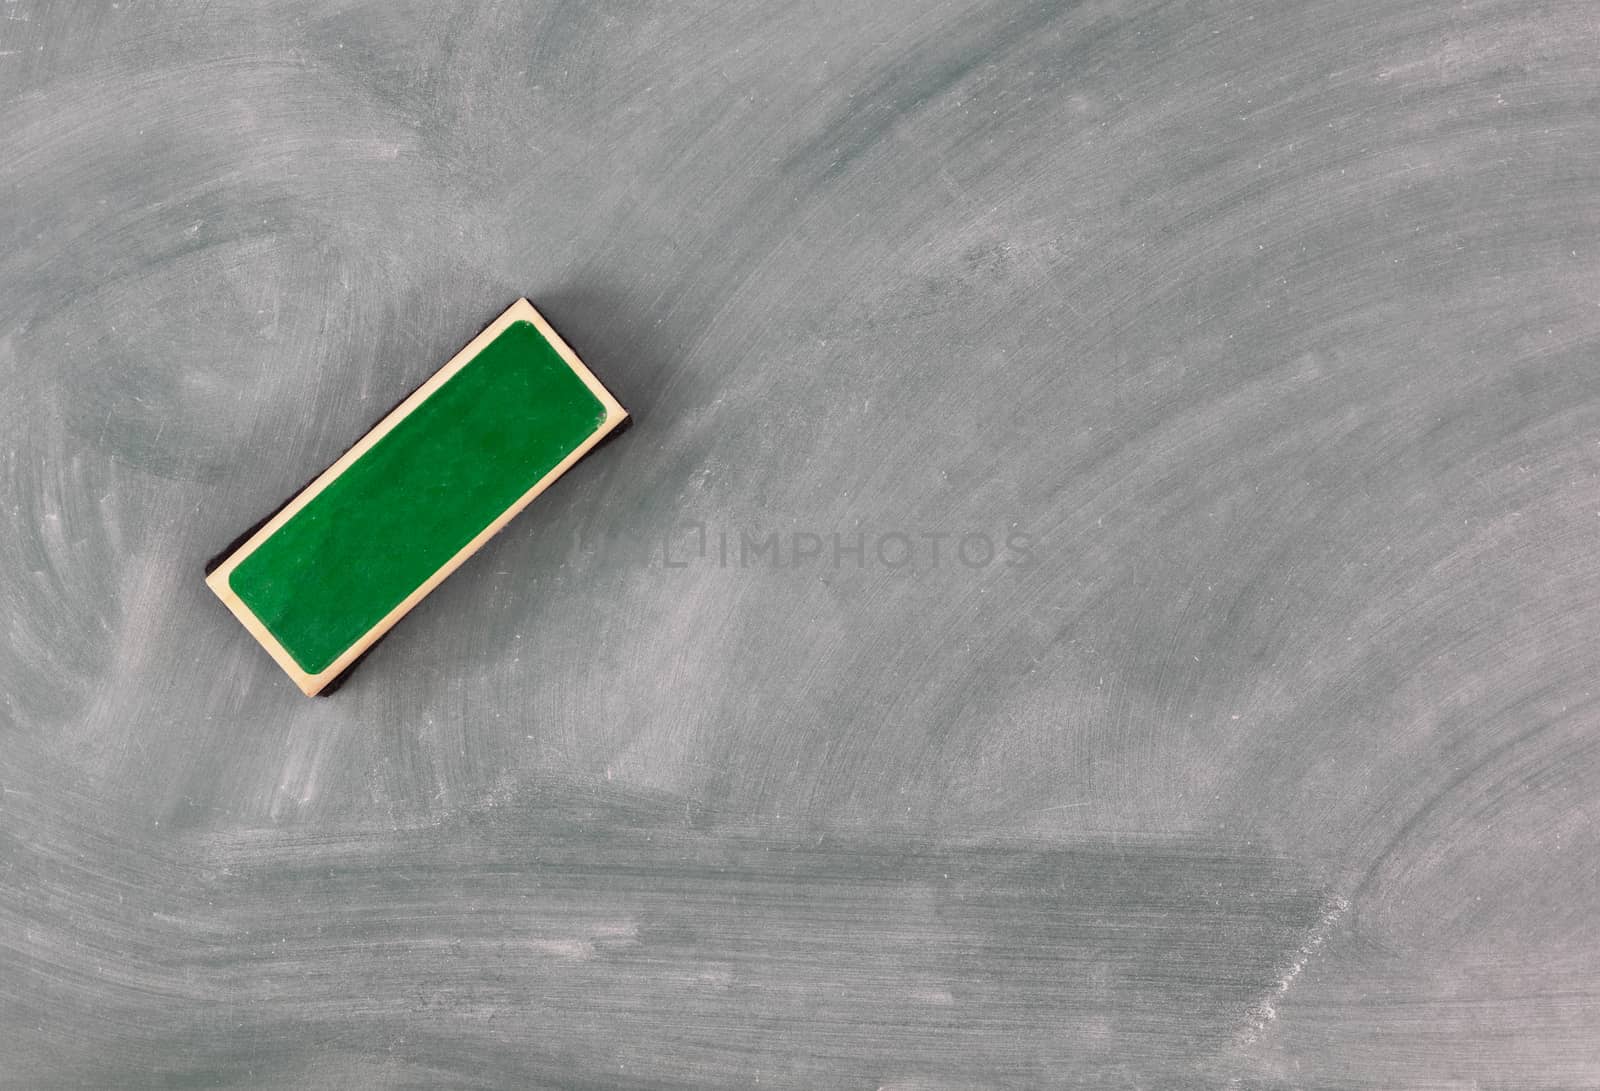 Back to school concept with green erased chalkboard and eraser